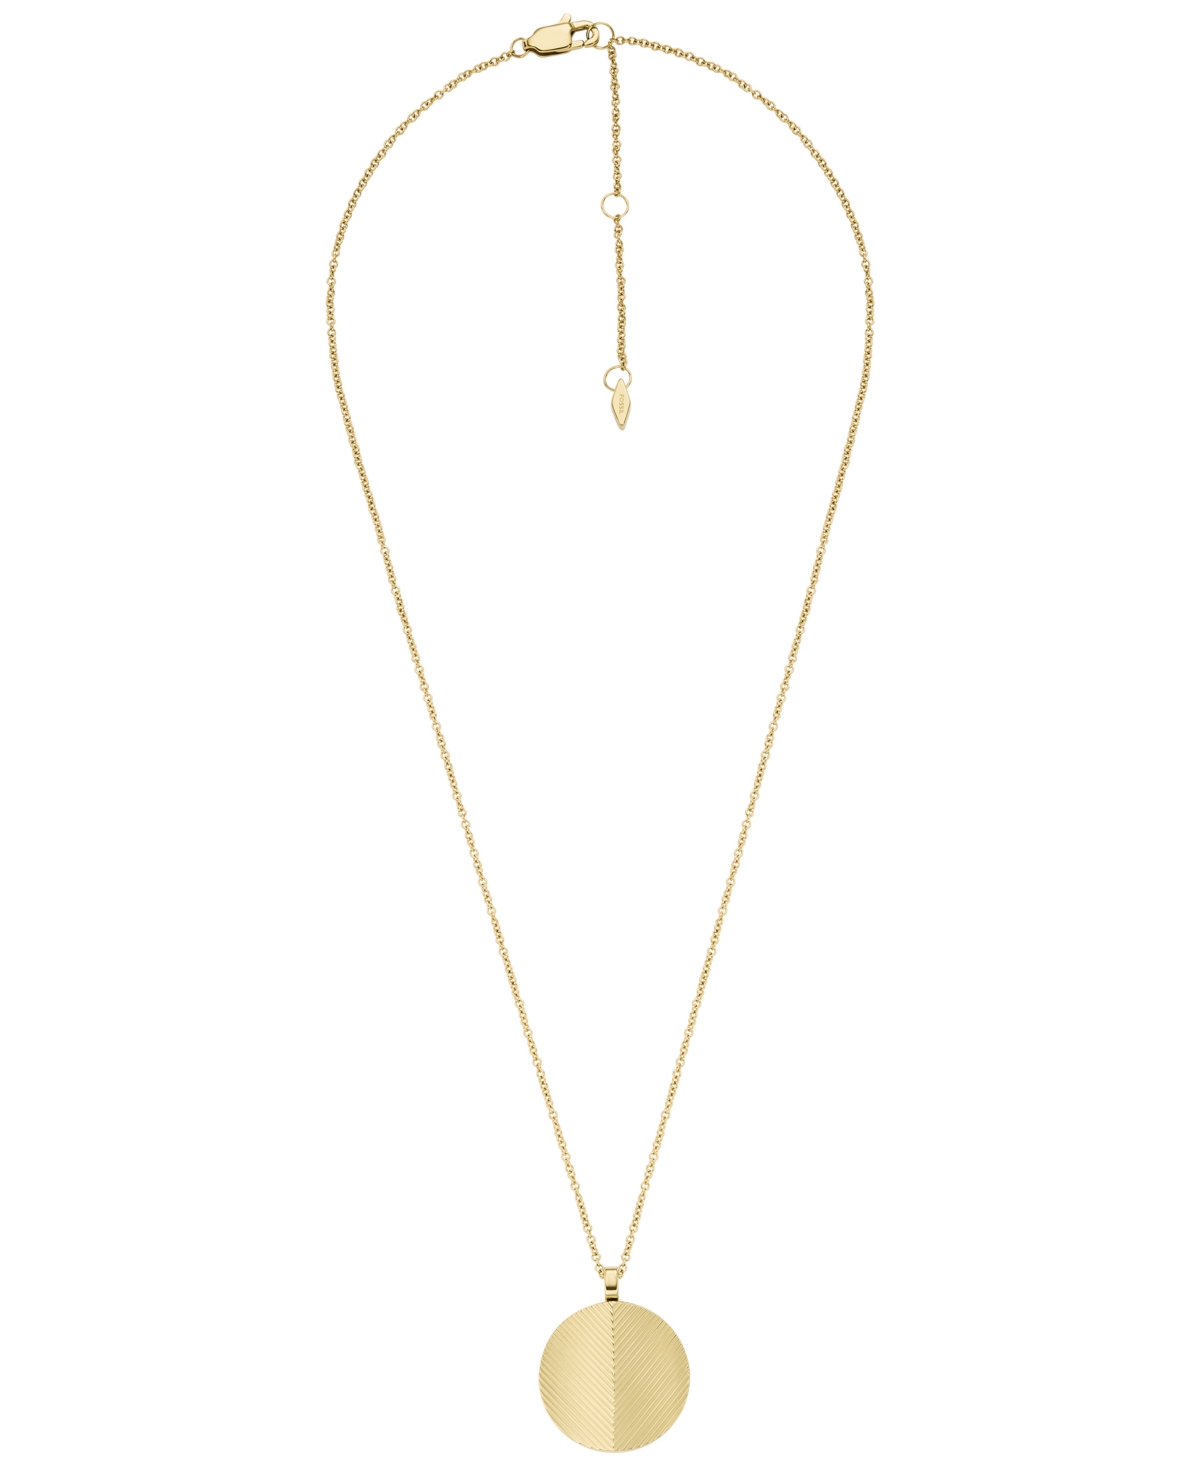 Fossil Harlow Linear Texture Gold-tone Stainless Steel Chain Necklace